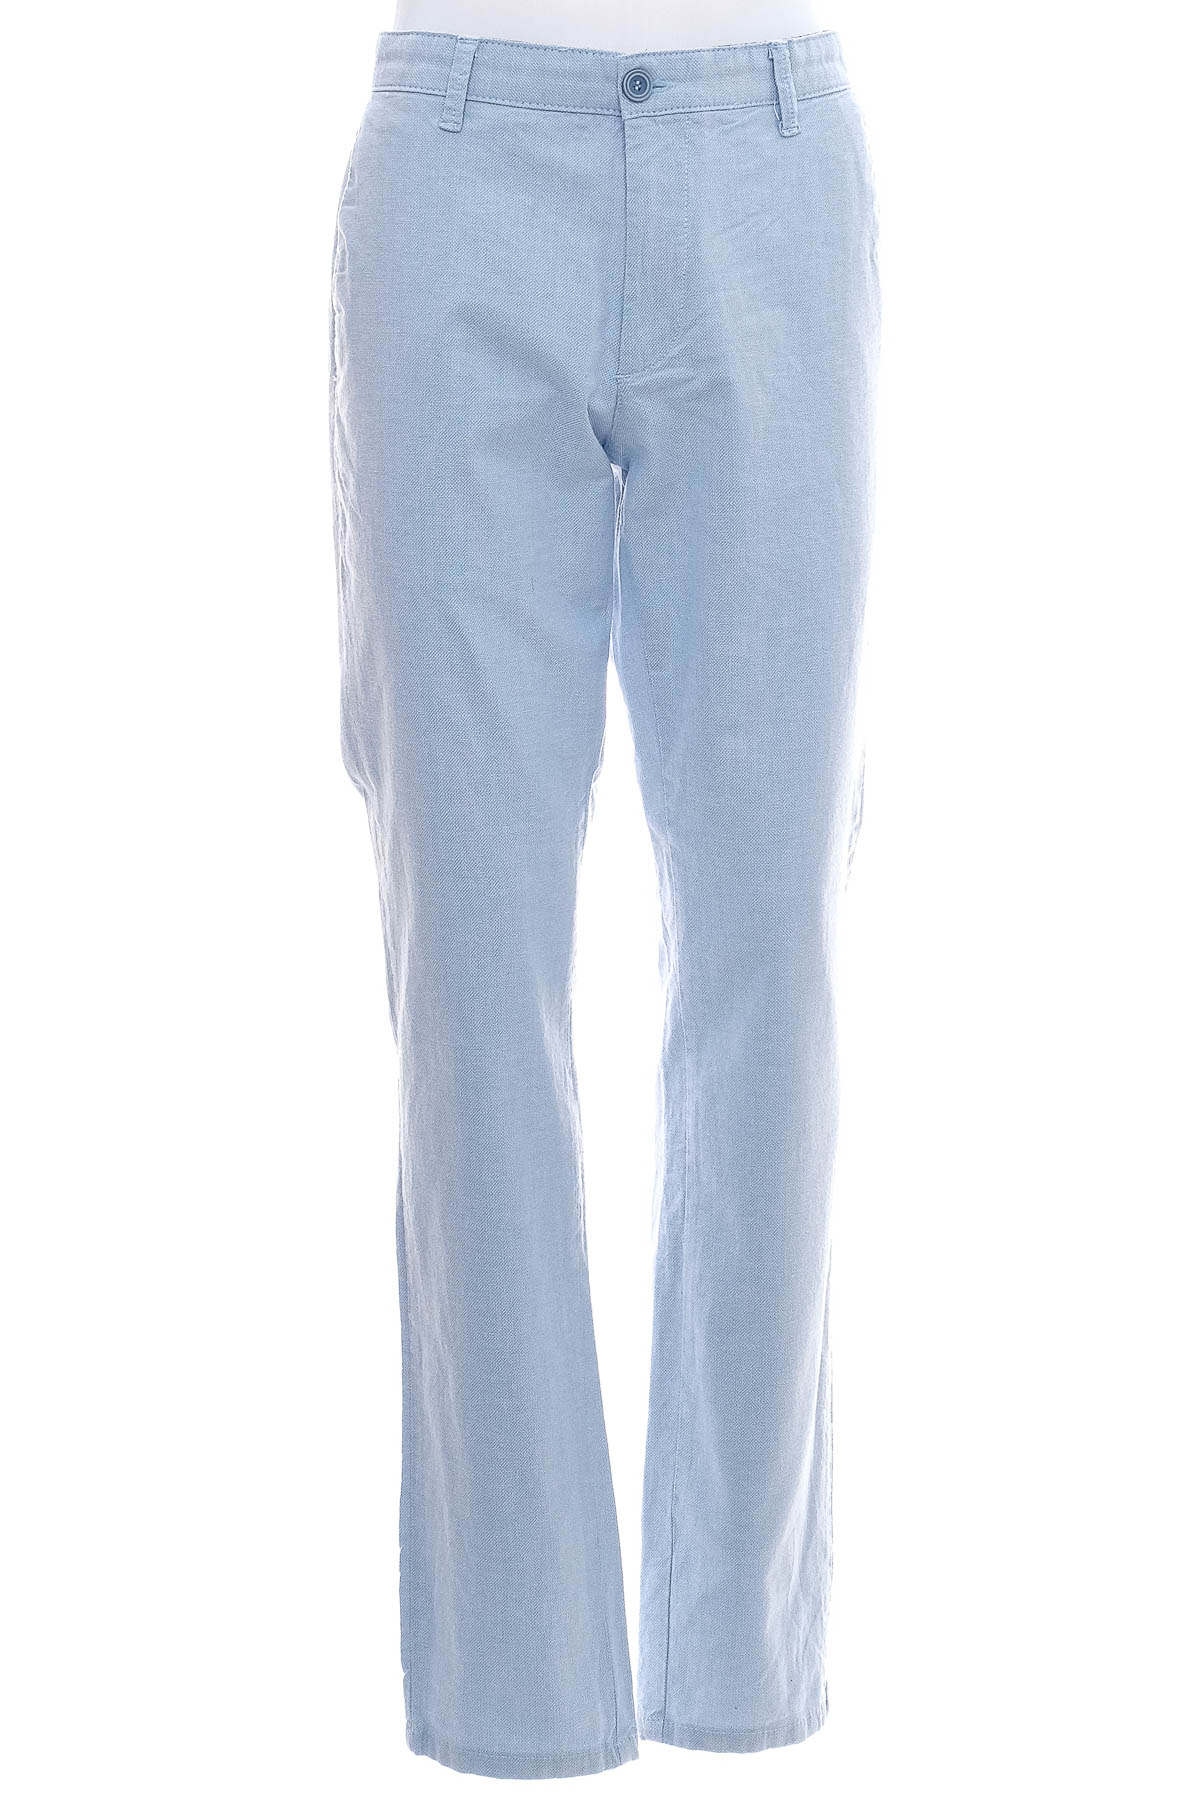 Men's trousers - LCW VISION - 0